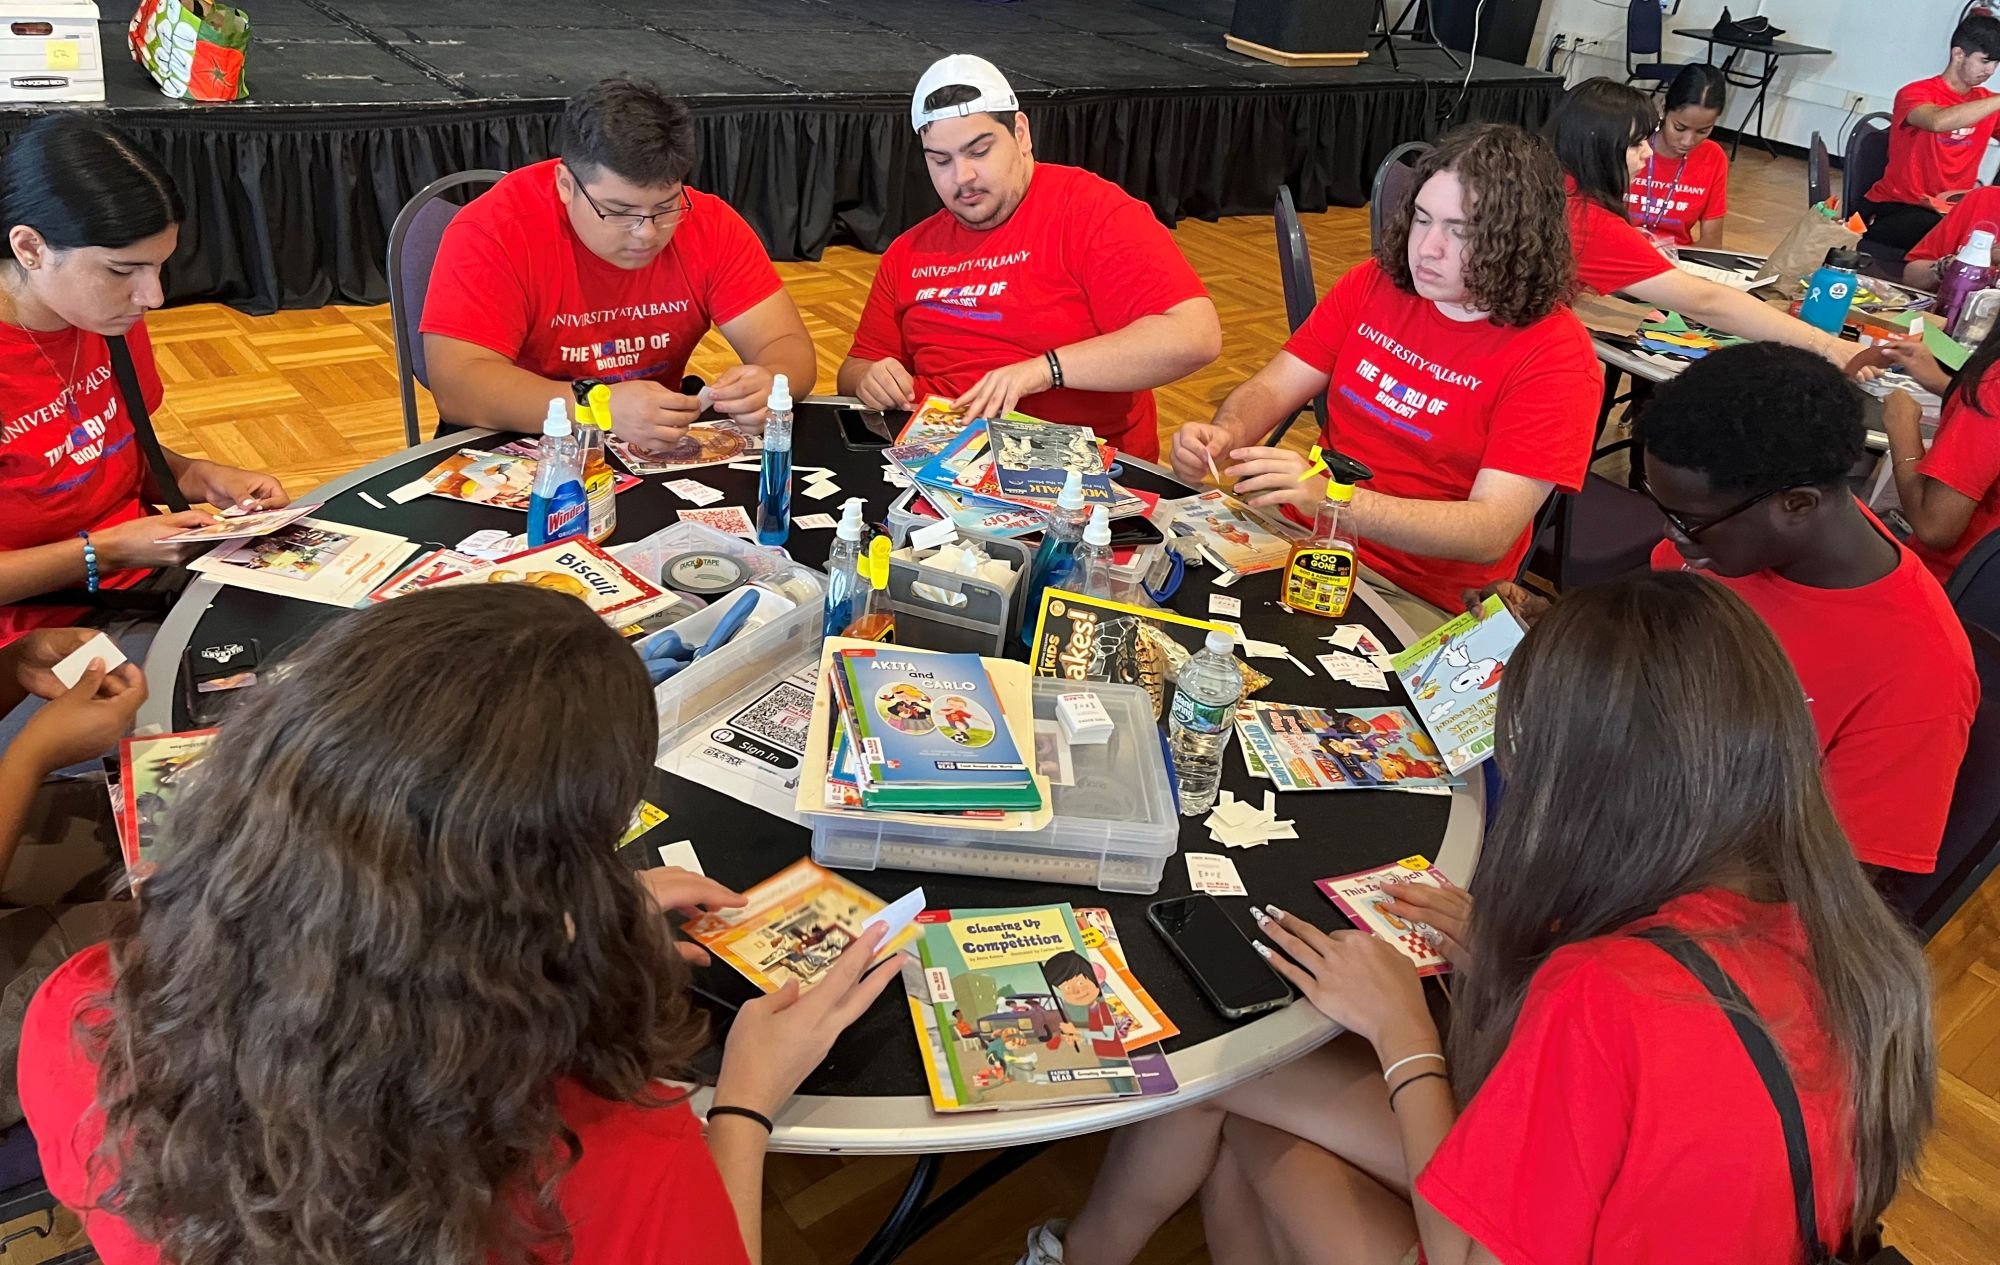 Eight students in matching red T-shirts that say "The World of Biology" are seating around a table and mending used children's books.